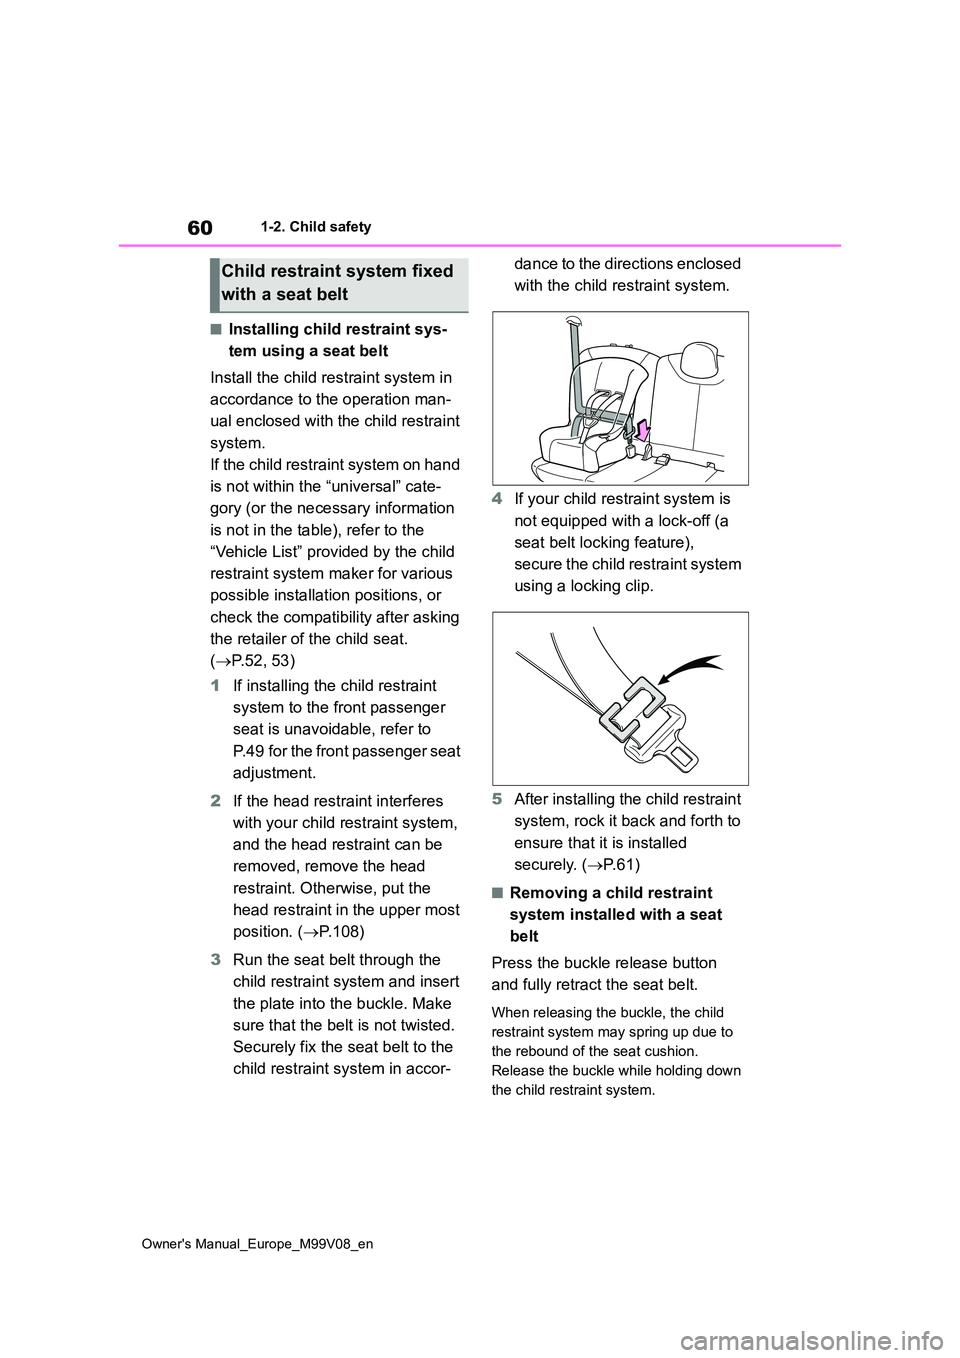 TOYOTA AYGO X 2022   (in English) User Guide 60
Owner's Manual_Europe_M99V08_en
1-2. Child safety
■Installing child restraint sys- 
tem using a seat belt 
Install the child restraint system in  
accordance to the operation man- 
ual enclos